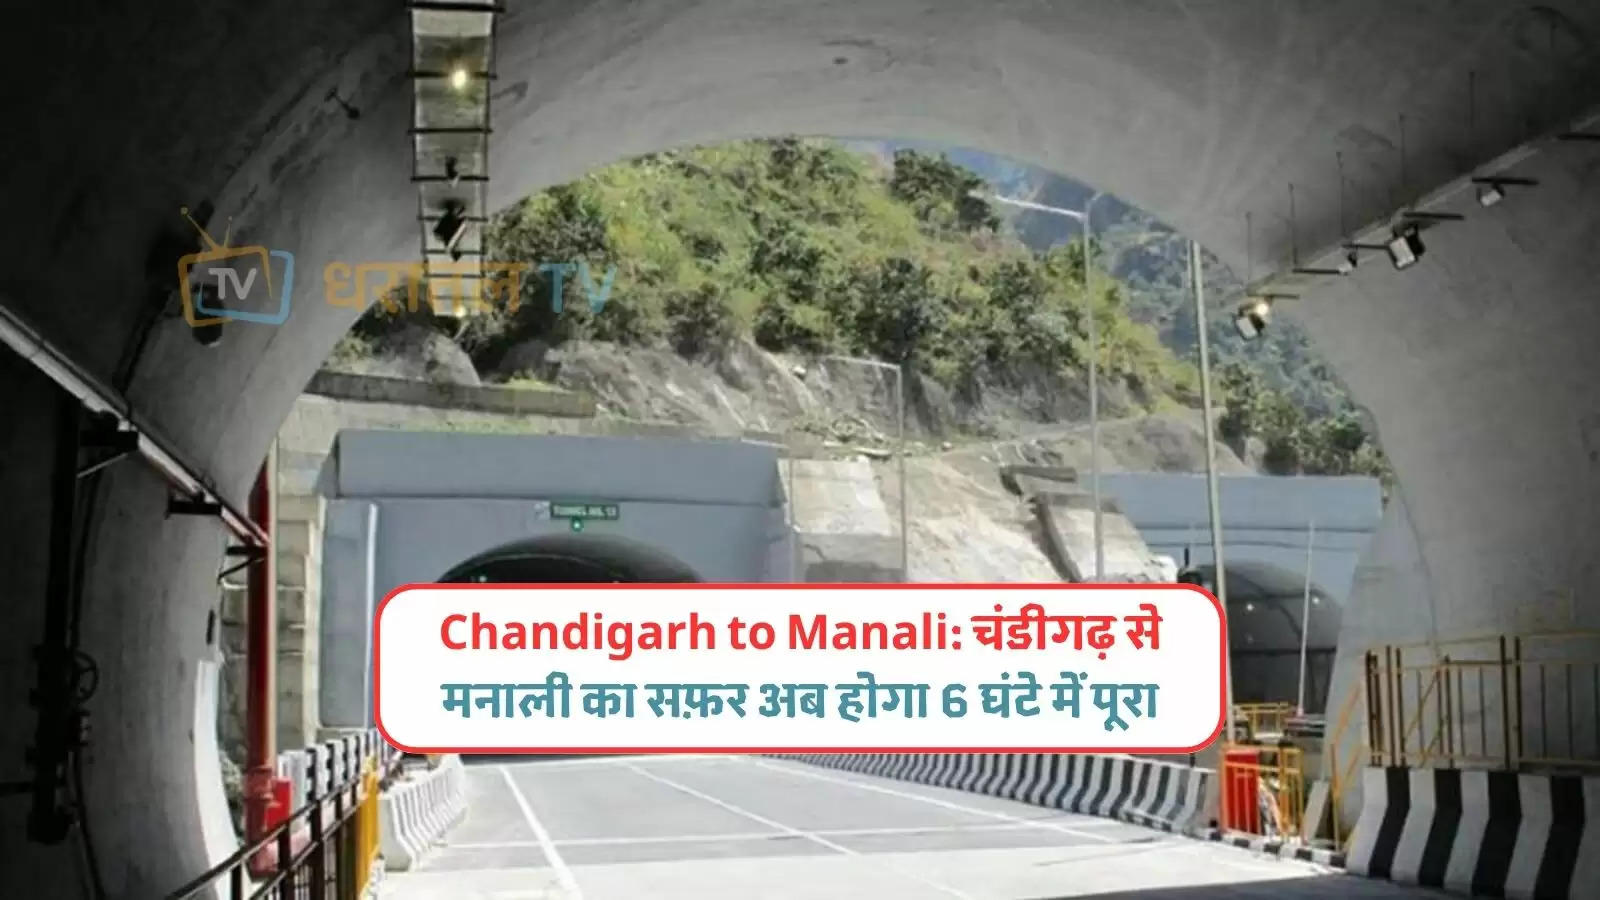 nhai opened the 5 tunnel of highway for transport